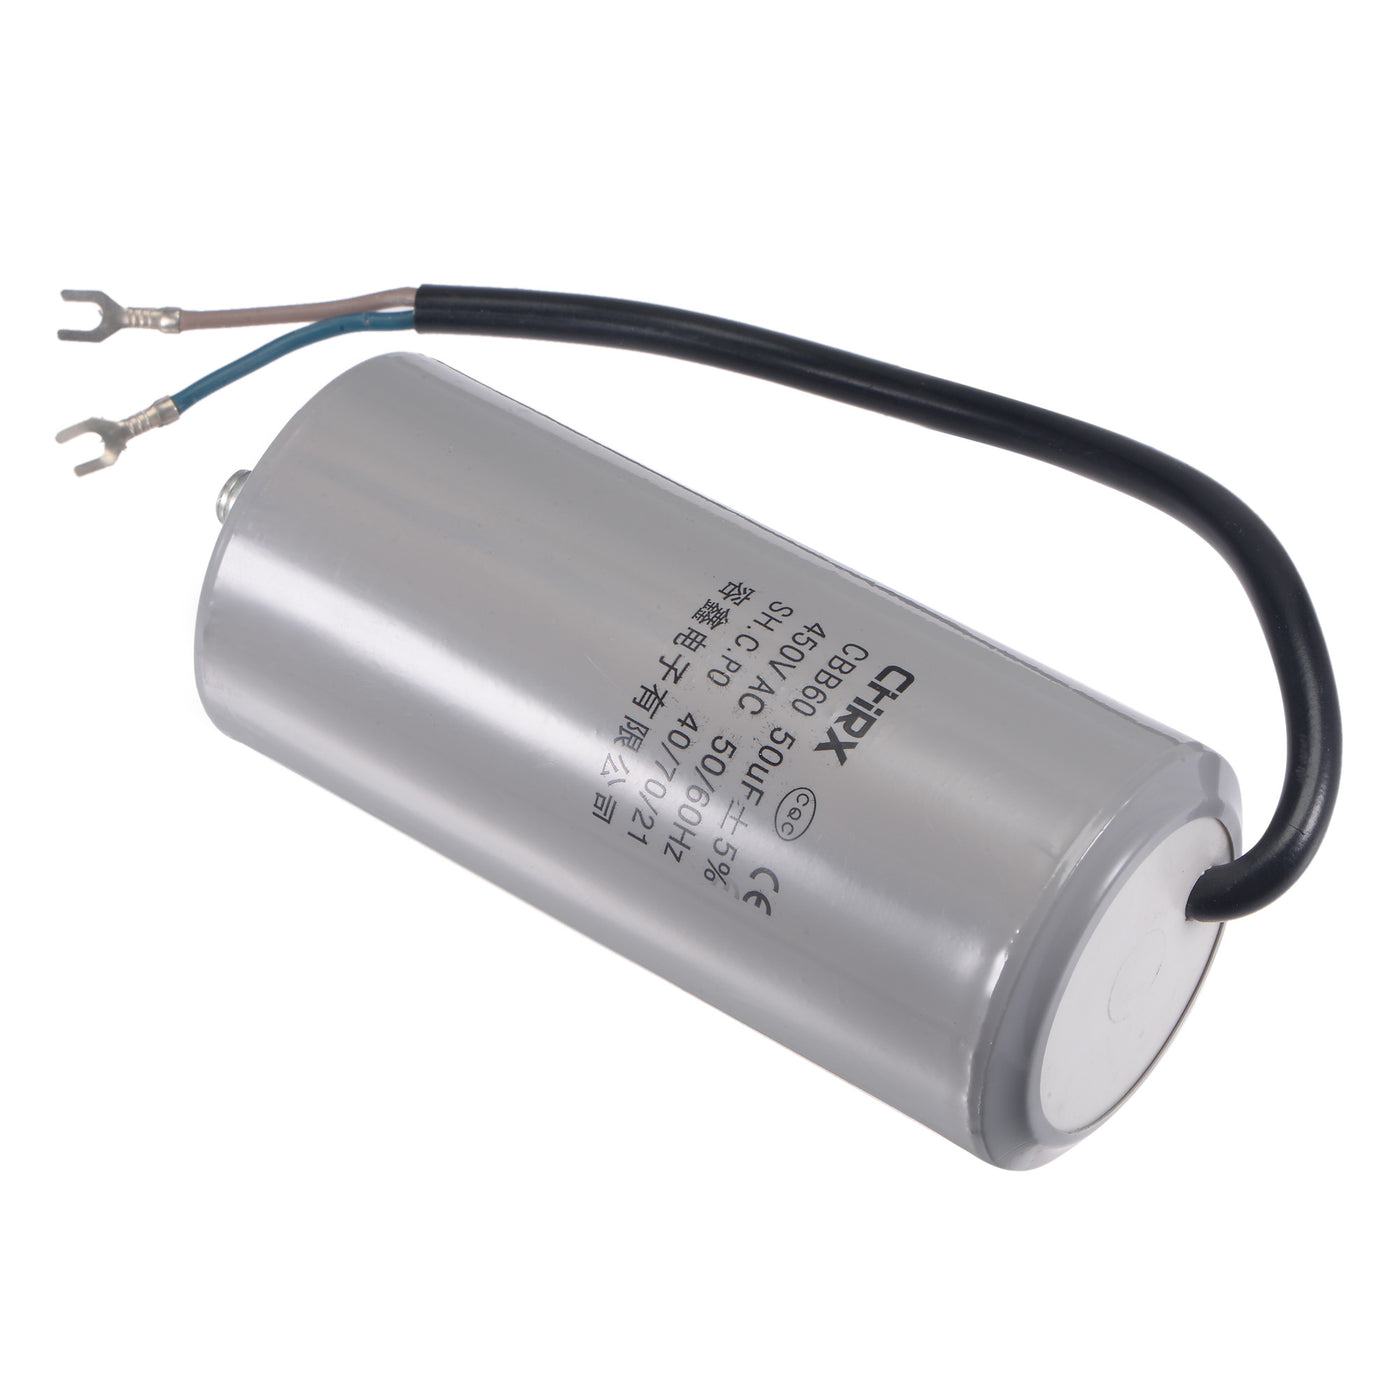 uxcell Uxcell CBB60 Run Capacitor 50uF 450V AC 2 Wires 50/60Hz Cylinder 111x50mm with Terminal, M8 Fixing Stud for Air Compressor Water Pump Motor